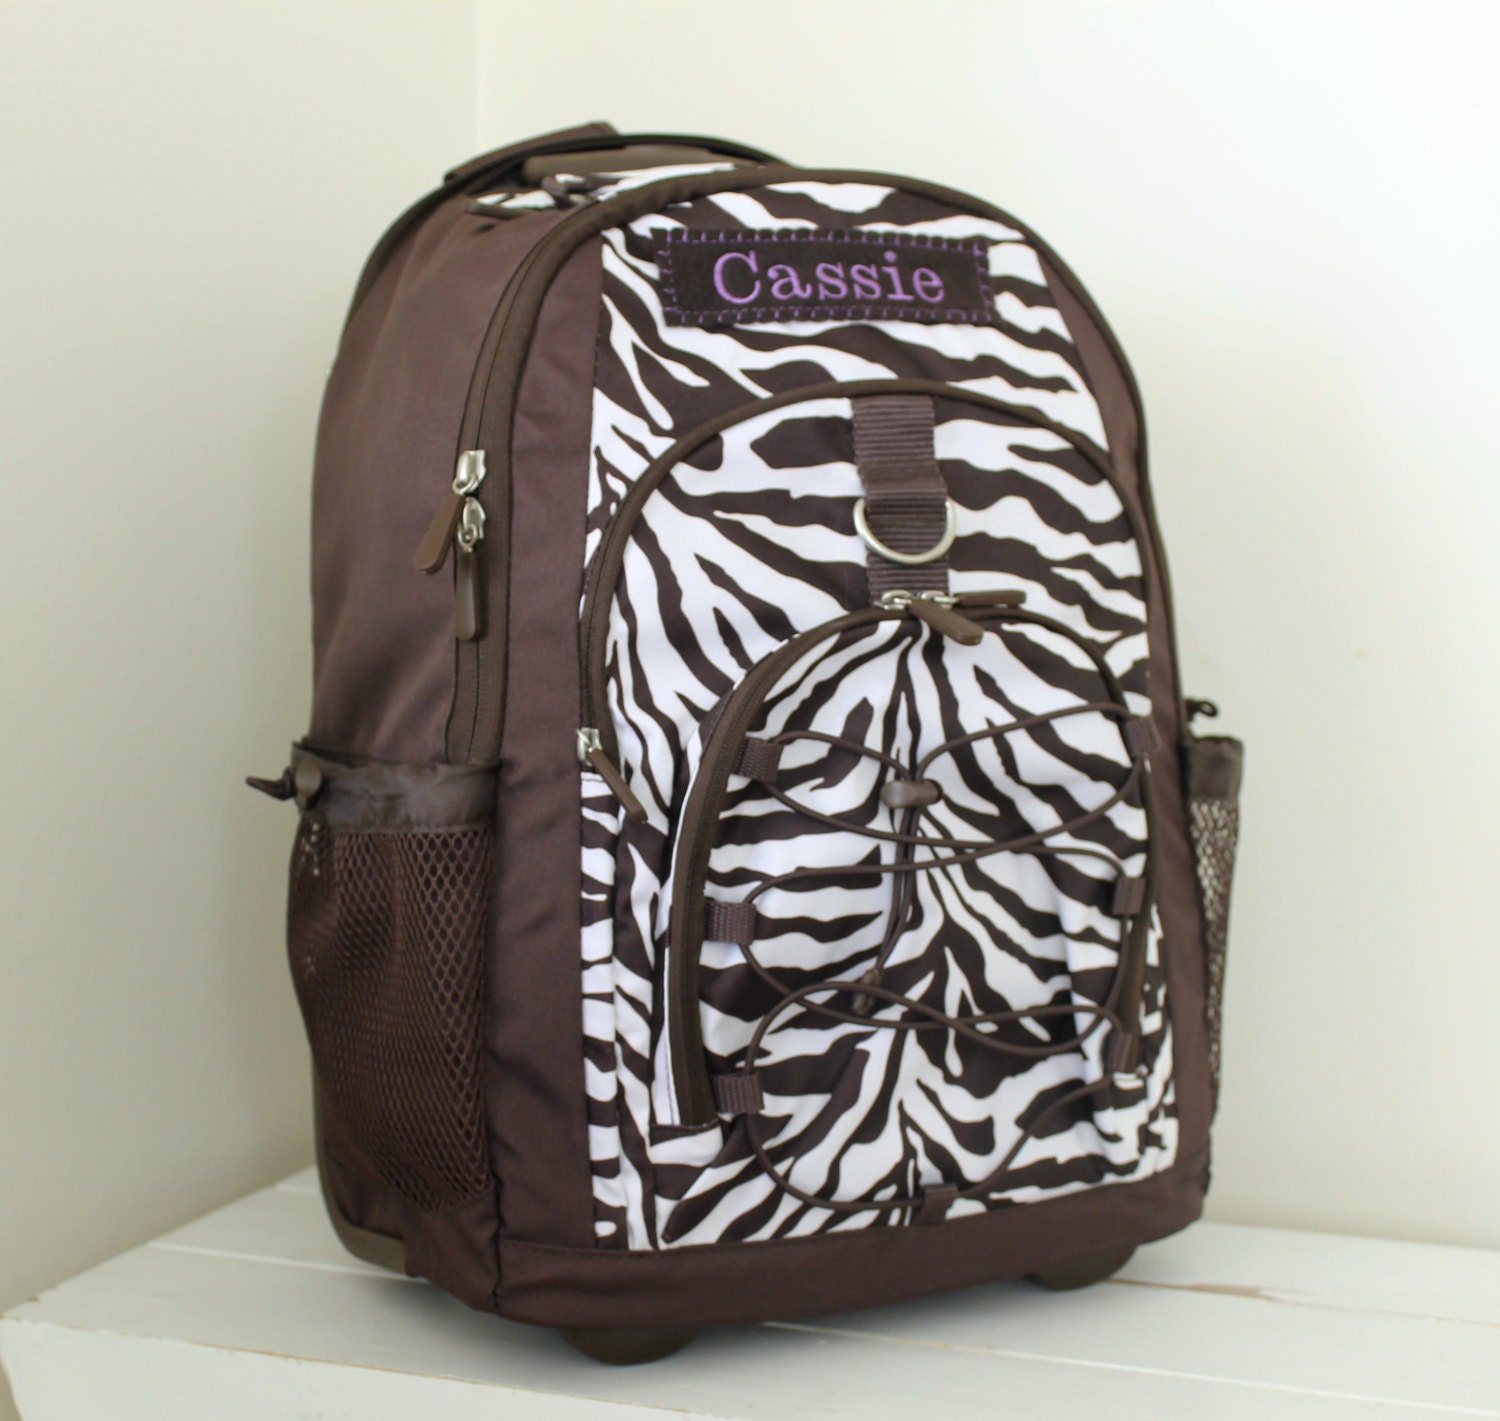 Large Rolling Backpack With Monogram Pottery Barn Teen